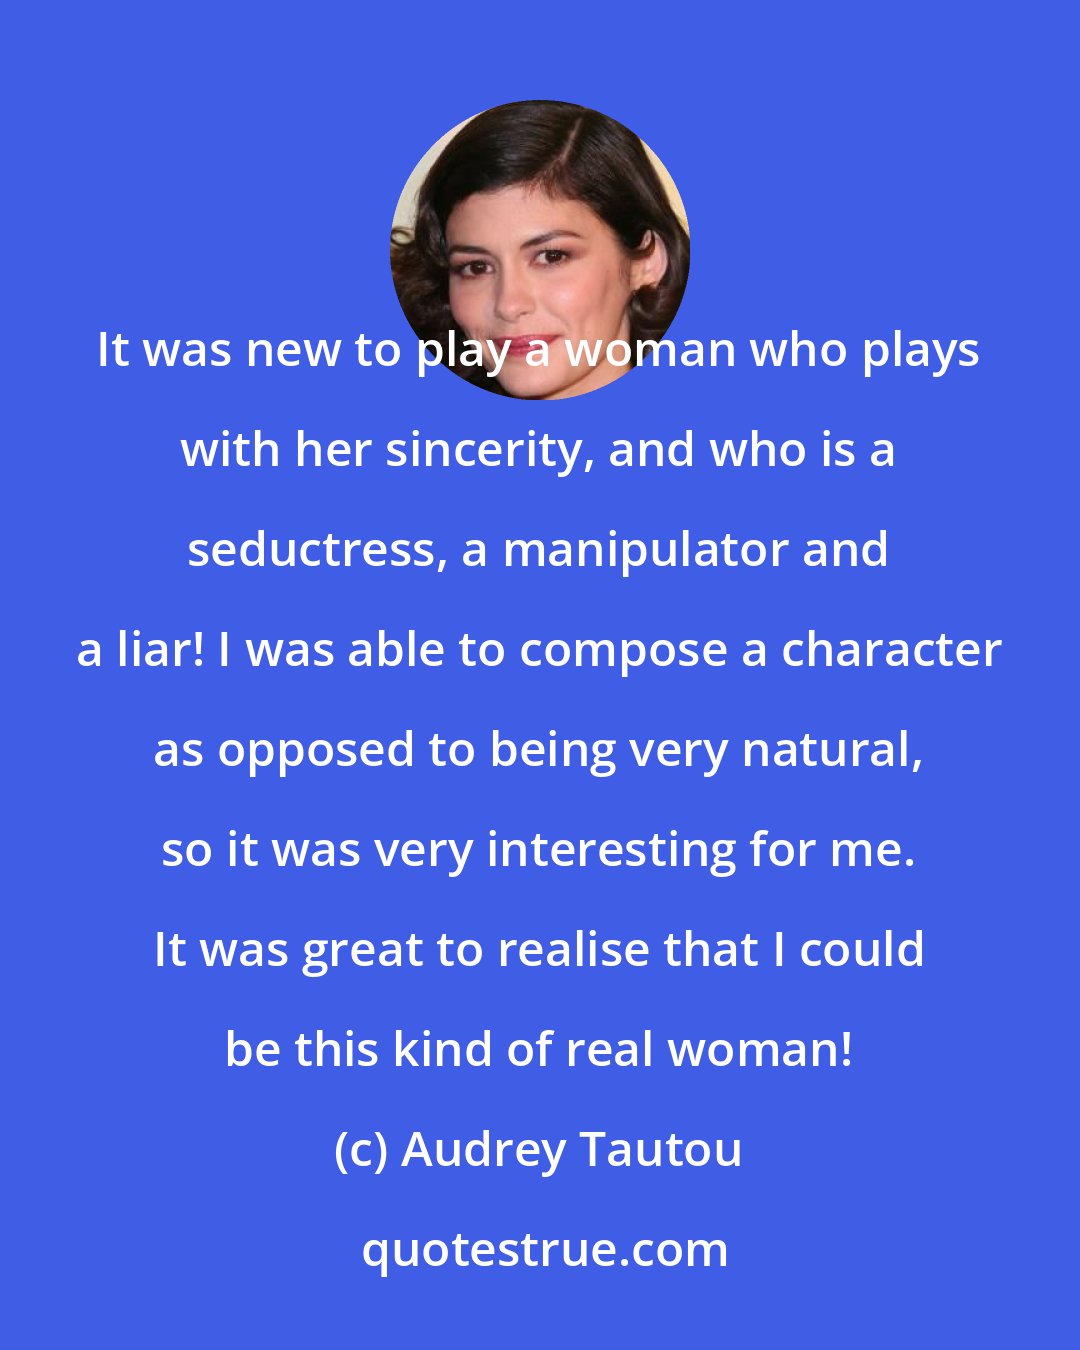 Audrey Tautou: It was new to play a woman who plays with her sincerity, and who is a seductress, a manipulator and a liar! I was able to compose a character as opposed to being very natural, so it was very interesting for me. It was great to realise that I could be this kind of real woman!